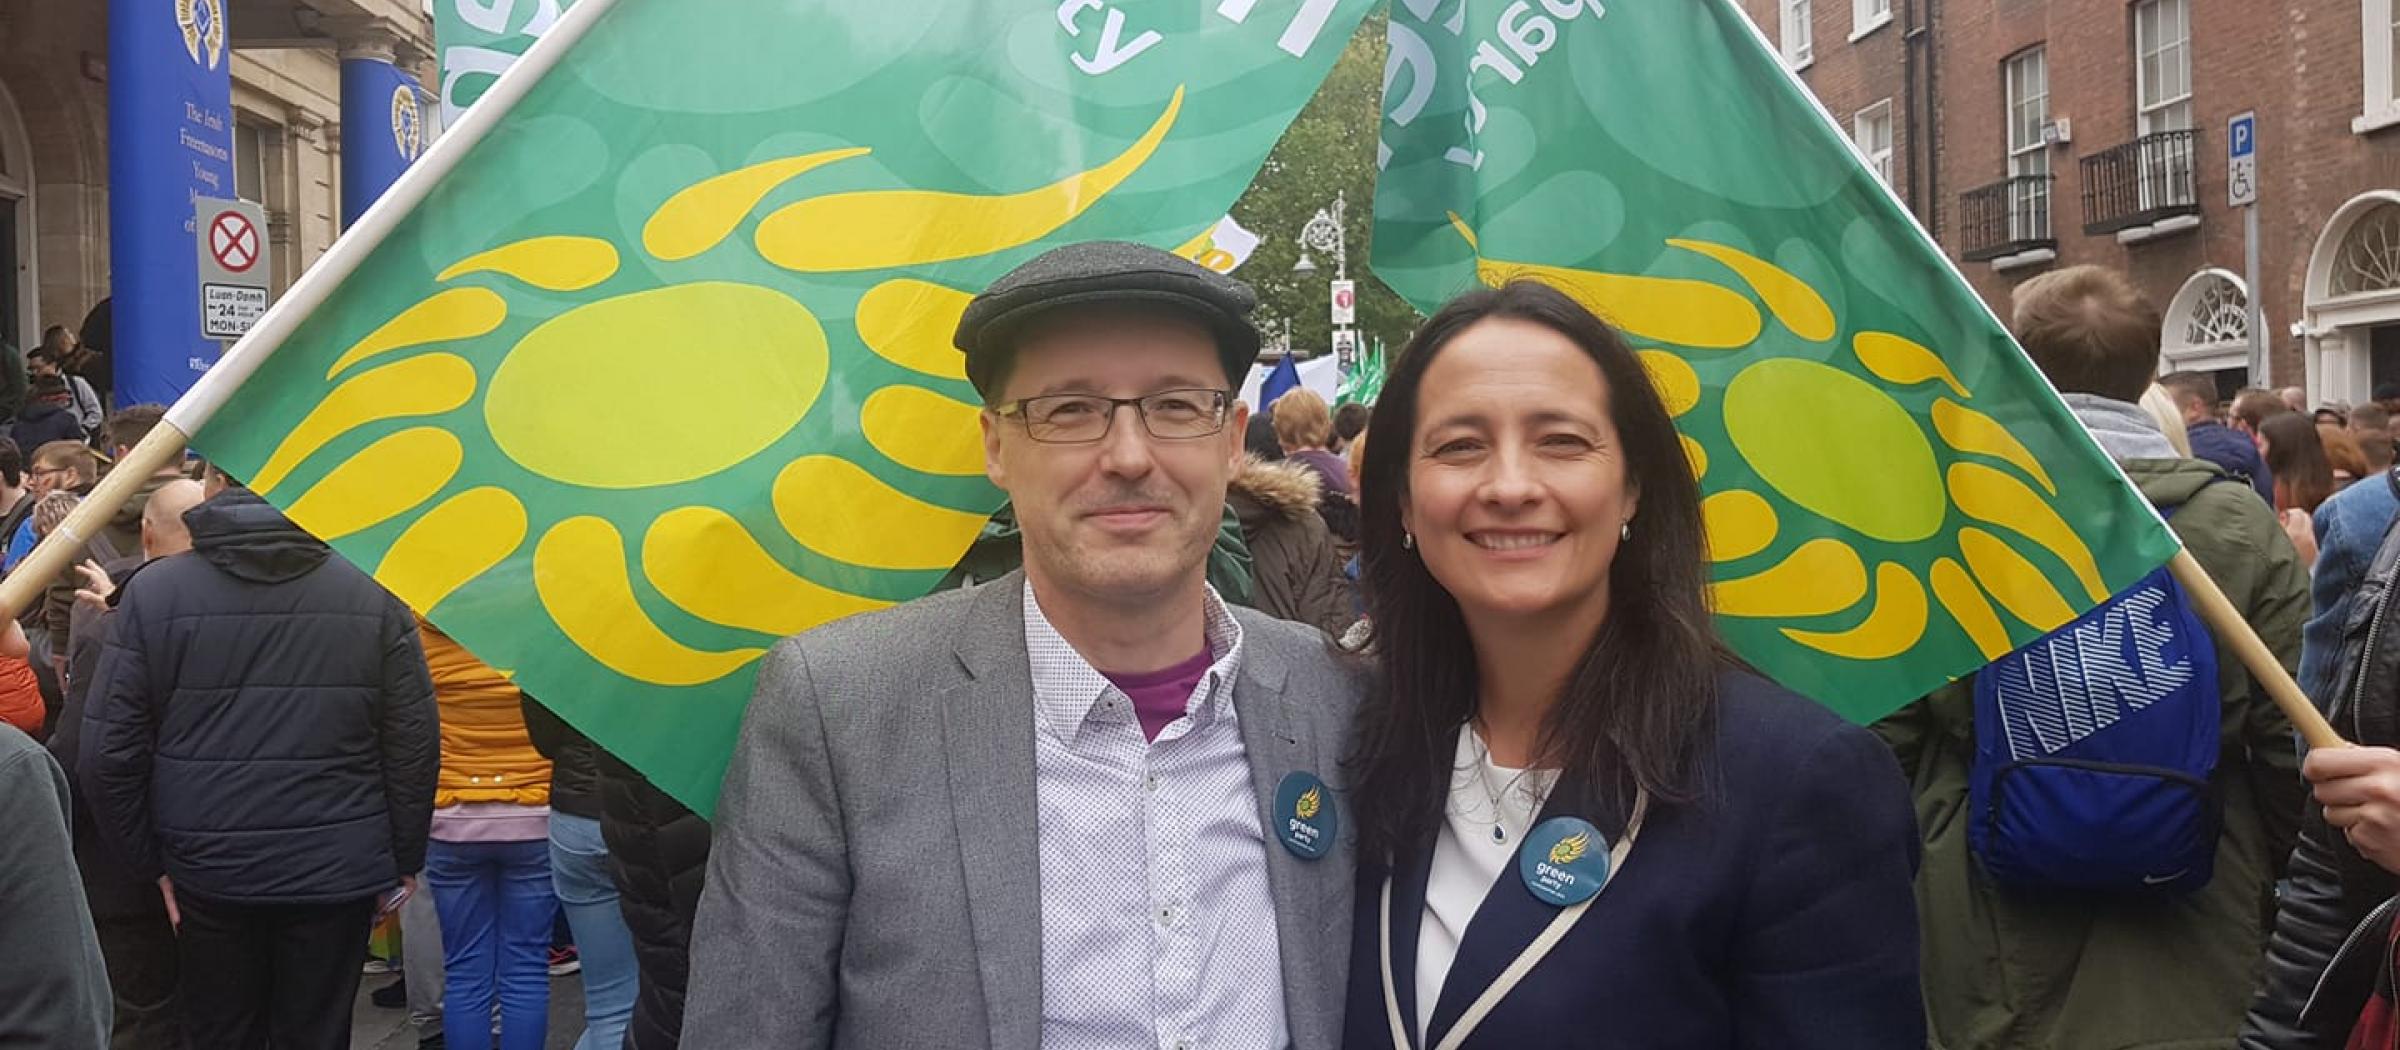 Daniel Dunne and Catherine Martin TD at a housing protest in 2018